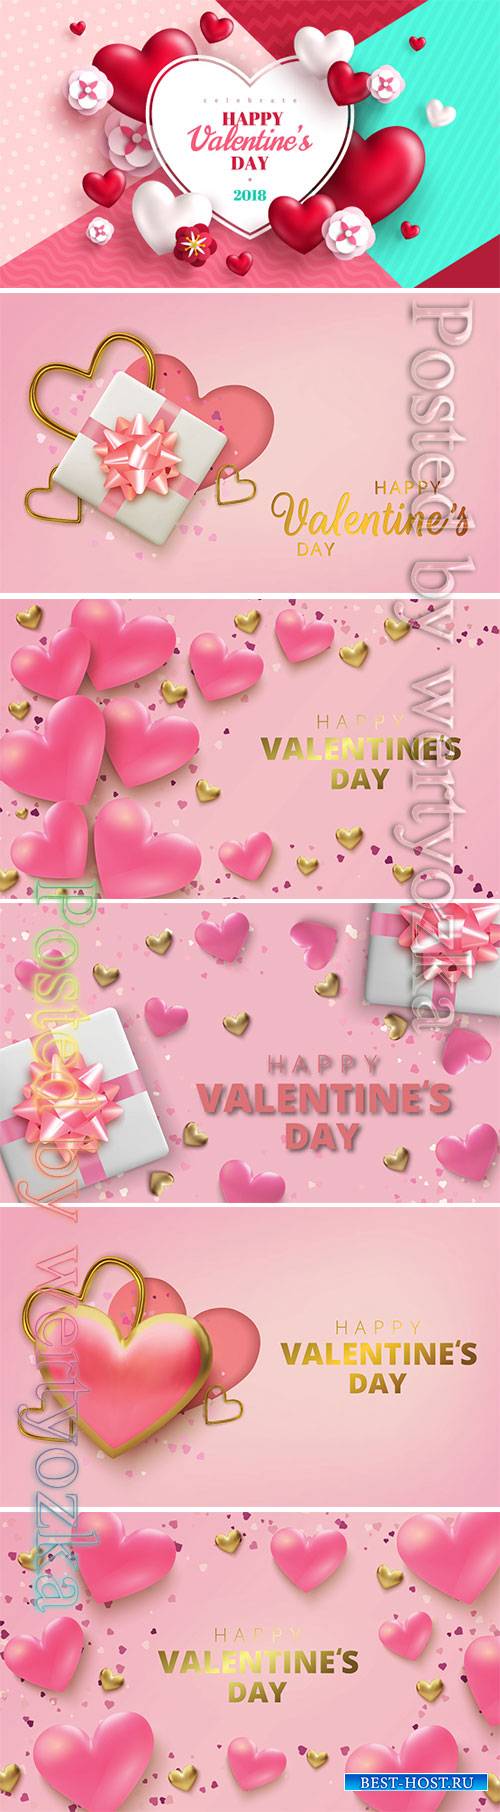 Valentines day vector background with heart # 5